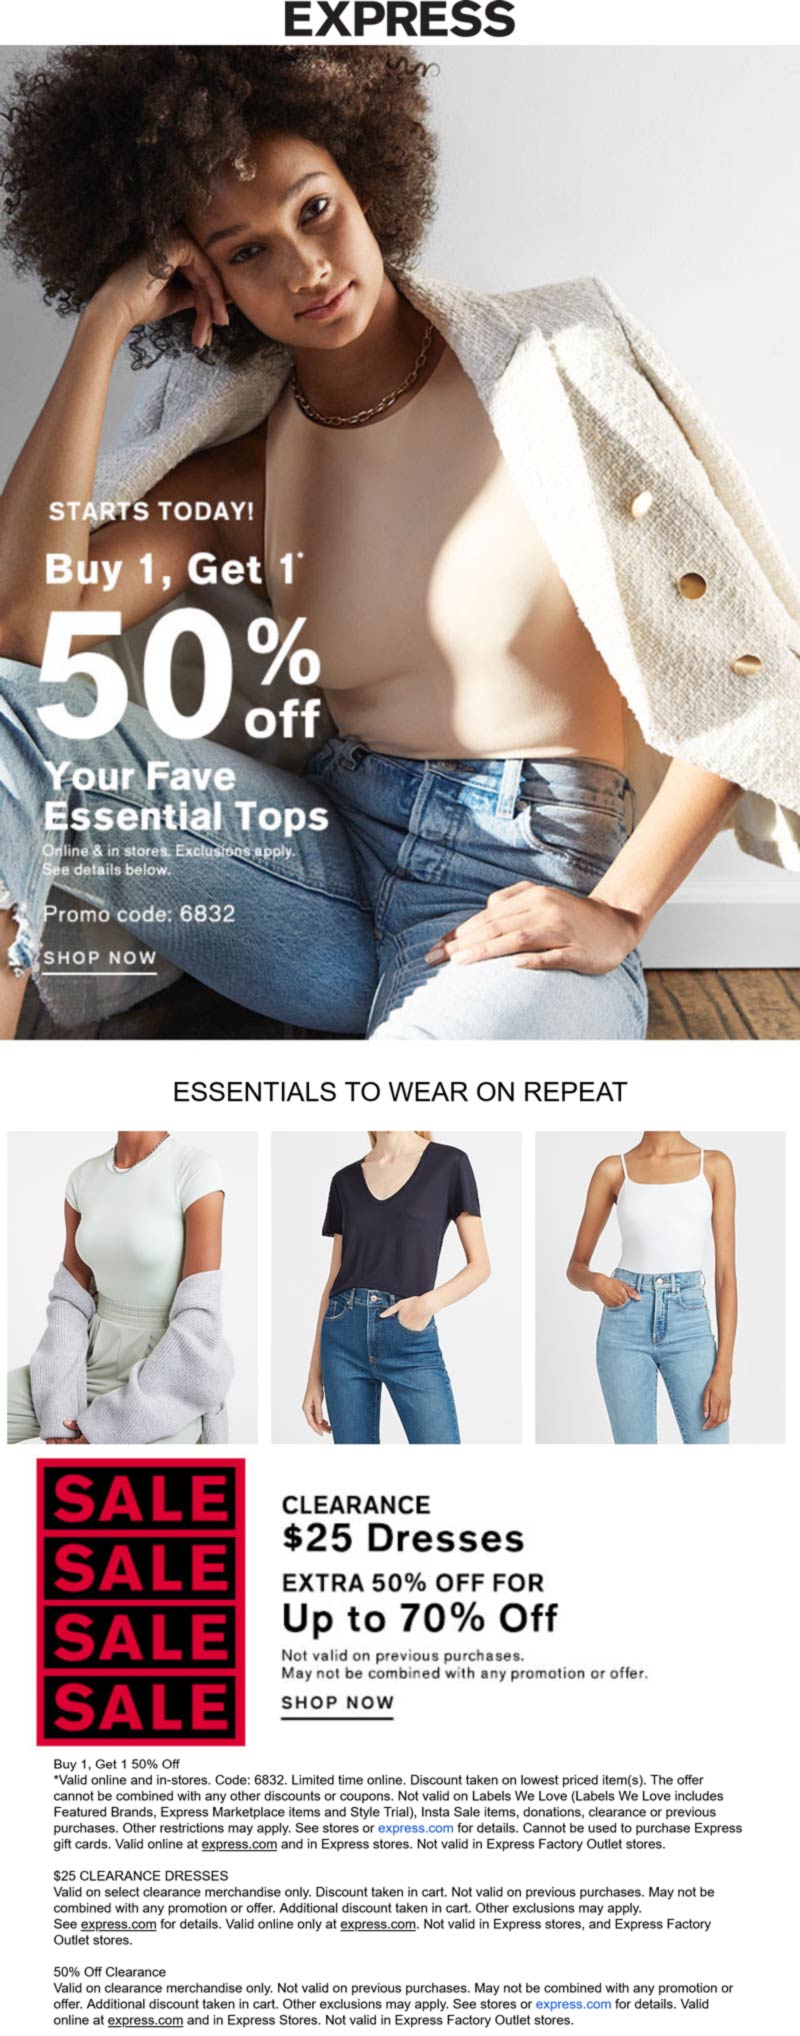 Second top 50 off at Express, or online via promo code 6832 express